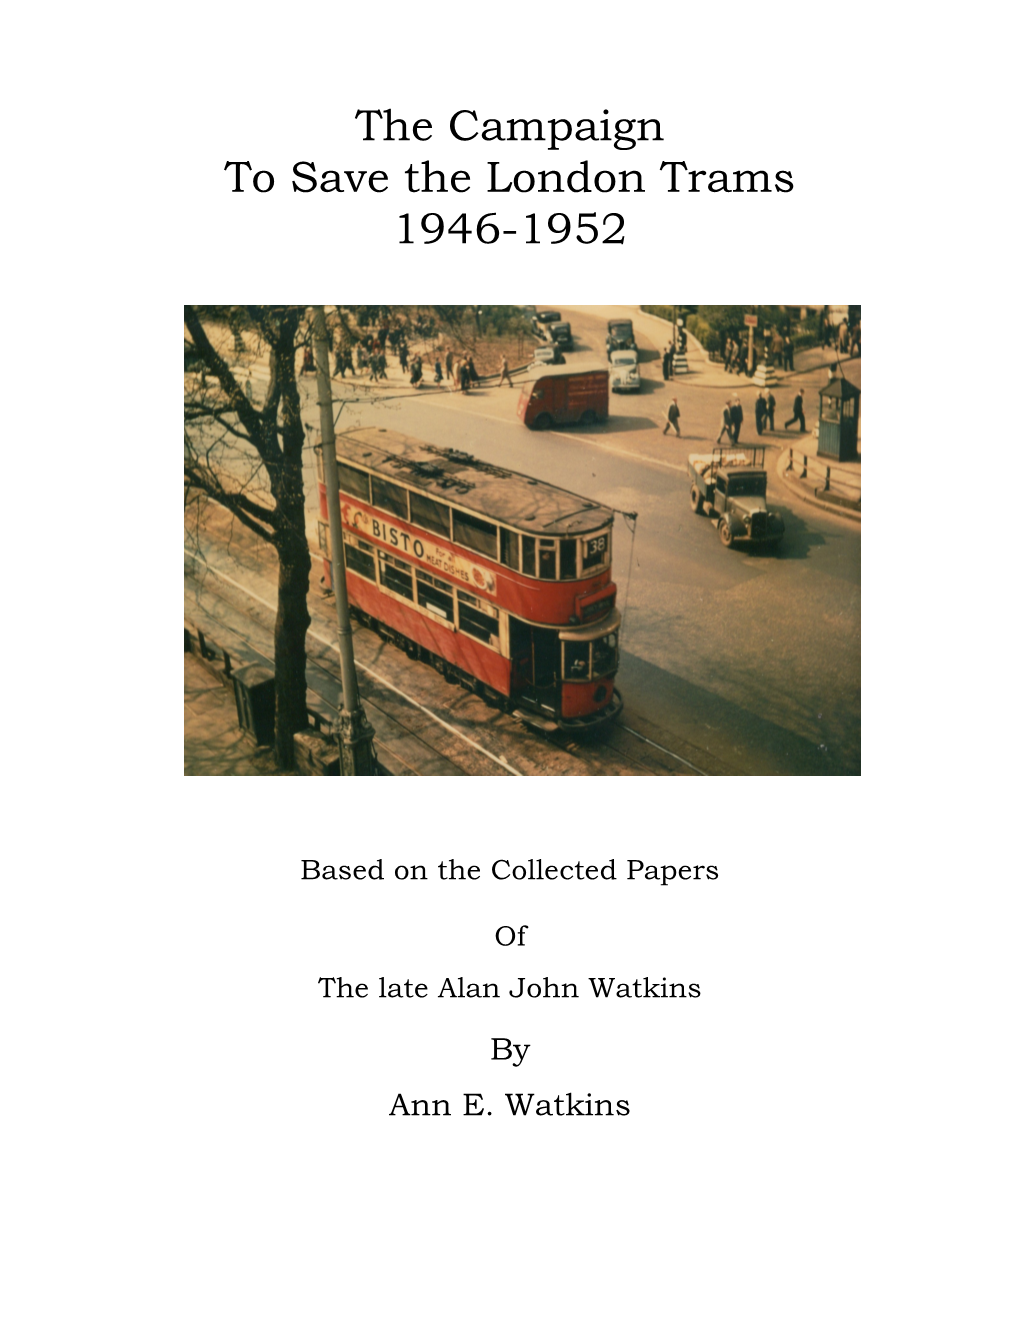 The Campaign to Save the London Trams 1946-1952